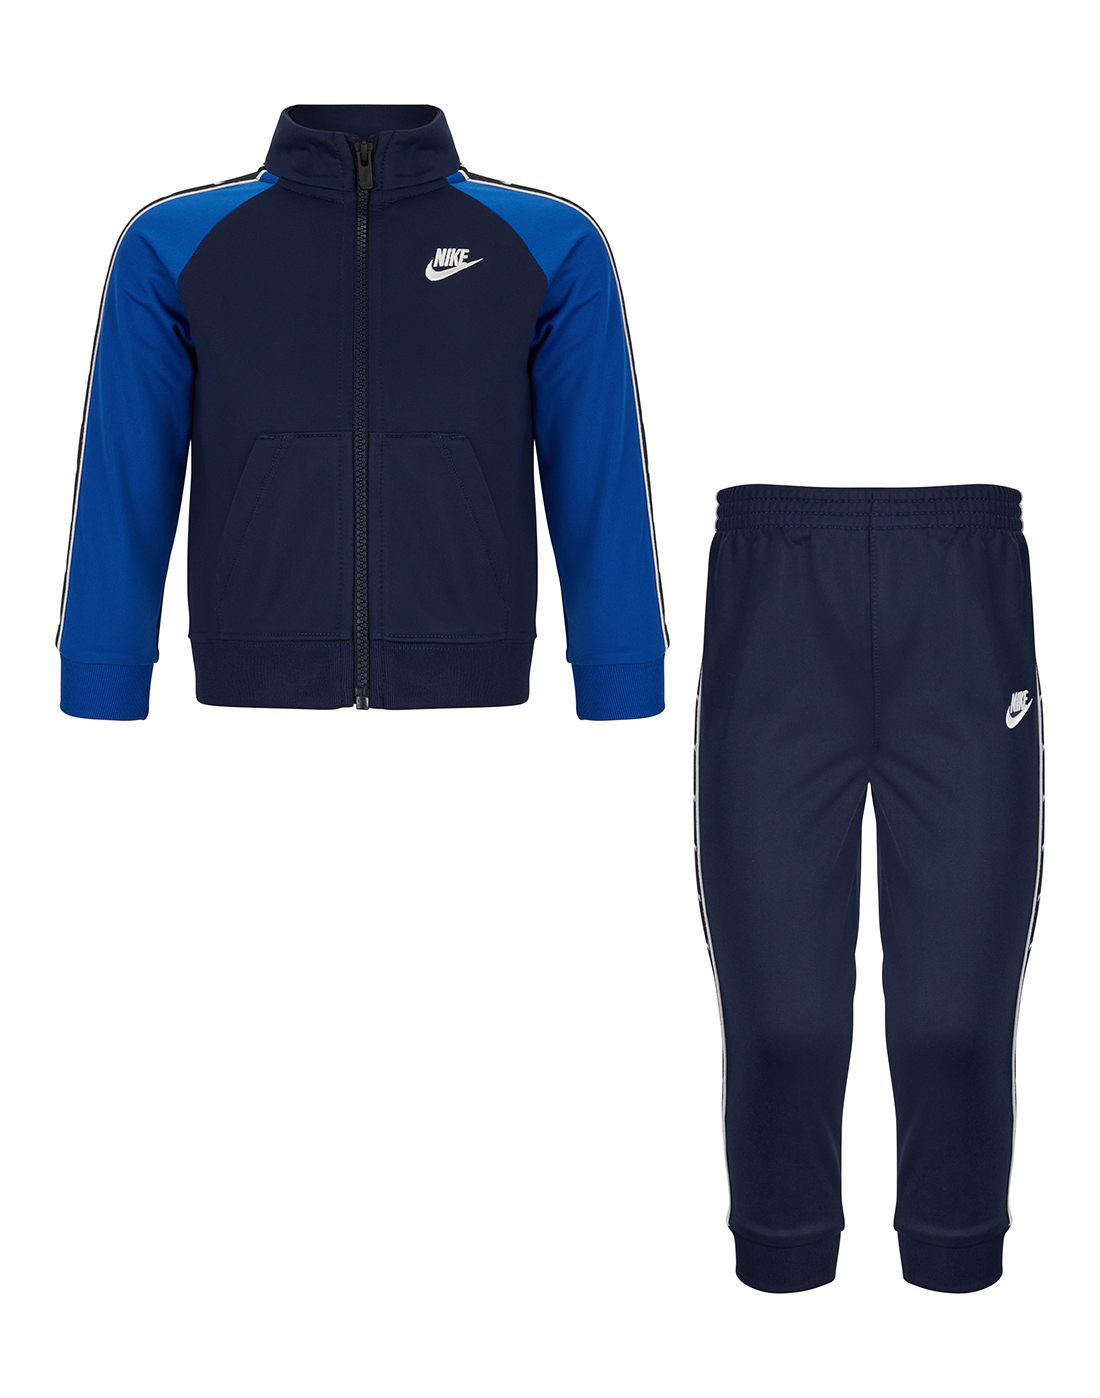 Nike Younger Boys Tricot Tracksuit - Navy | Life Style Sports IE